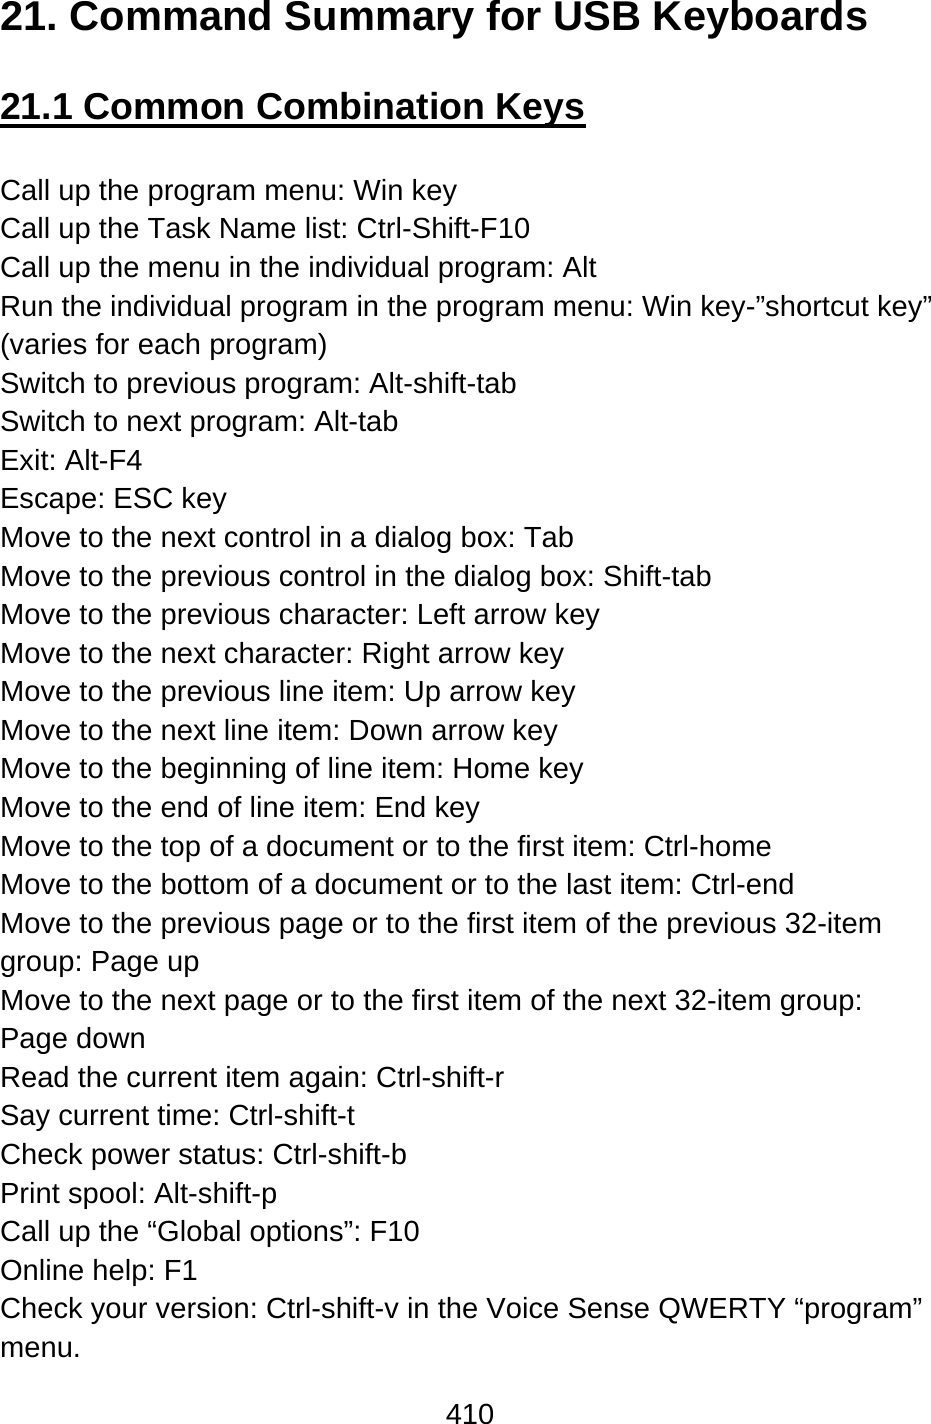 410  21. Command Summary for USB Keyboards  21.1 Common Combination Keys  Call up the program menu: Win key Call up the Task Name list: Ctrl-Shift-F10 Call up the menu in the individual program: Alt   Run the individual program in the program menu: Win key-”shortcut key” (varies for each program) Switch to previous program: Alt-shift-tab Switch to next program: Alt-tab Exit: Alt-F4 Escape: ESC key Move to the next control in a dialog box: Tab Move to the previous control in the dialog box: Shift-tab Move to the previous character: Left arrow key Move to the next character: Right arrow key Move to the previous line item: Up arrow key Move to the next line item: Down arrow key Move to the beginning of line item: Home key Move to the end of line item: End key Move to the top of a document or to the first item: Ctrl-home   Move to the bottom of a document or to the last item: Ctrl-end   Move to the previous page or to the first item of the previous 32-item group: Page up Move to the next page or to the first item of the next 32-item group:   Page down Read the current item again: Ctrl-shift-r Say current time: Ctrl-shift-t Check power status: Ctrl-shift-b Print spool: Alt-shift-p Call up the “Global options”: F10 Online help: F1 Check your version: Ctrl-shift-v in the Voice Sense QWERTY “program” menu. 